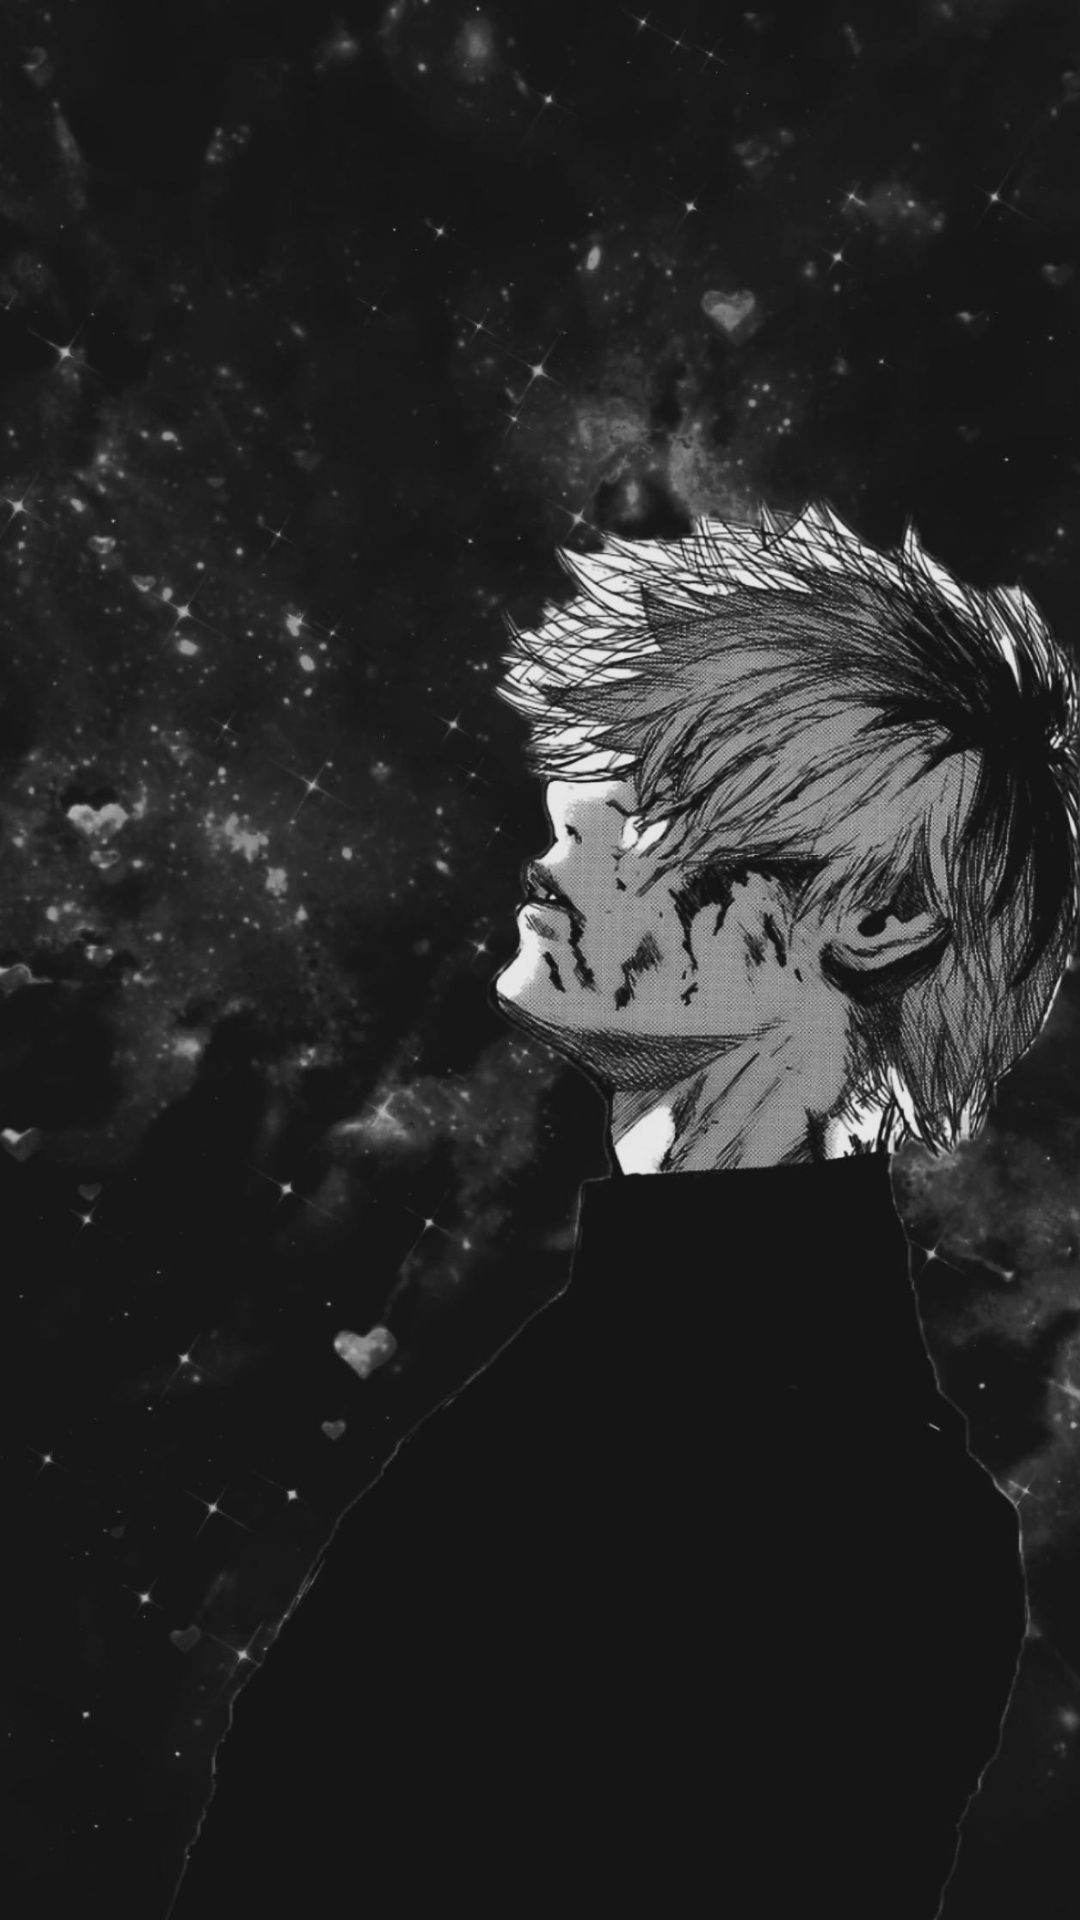 Aesthetic Anime Boy Wallpaper For Your Phone Black And White - Tokyo Ghoul